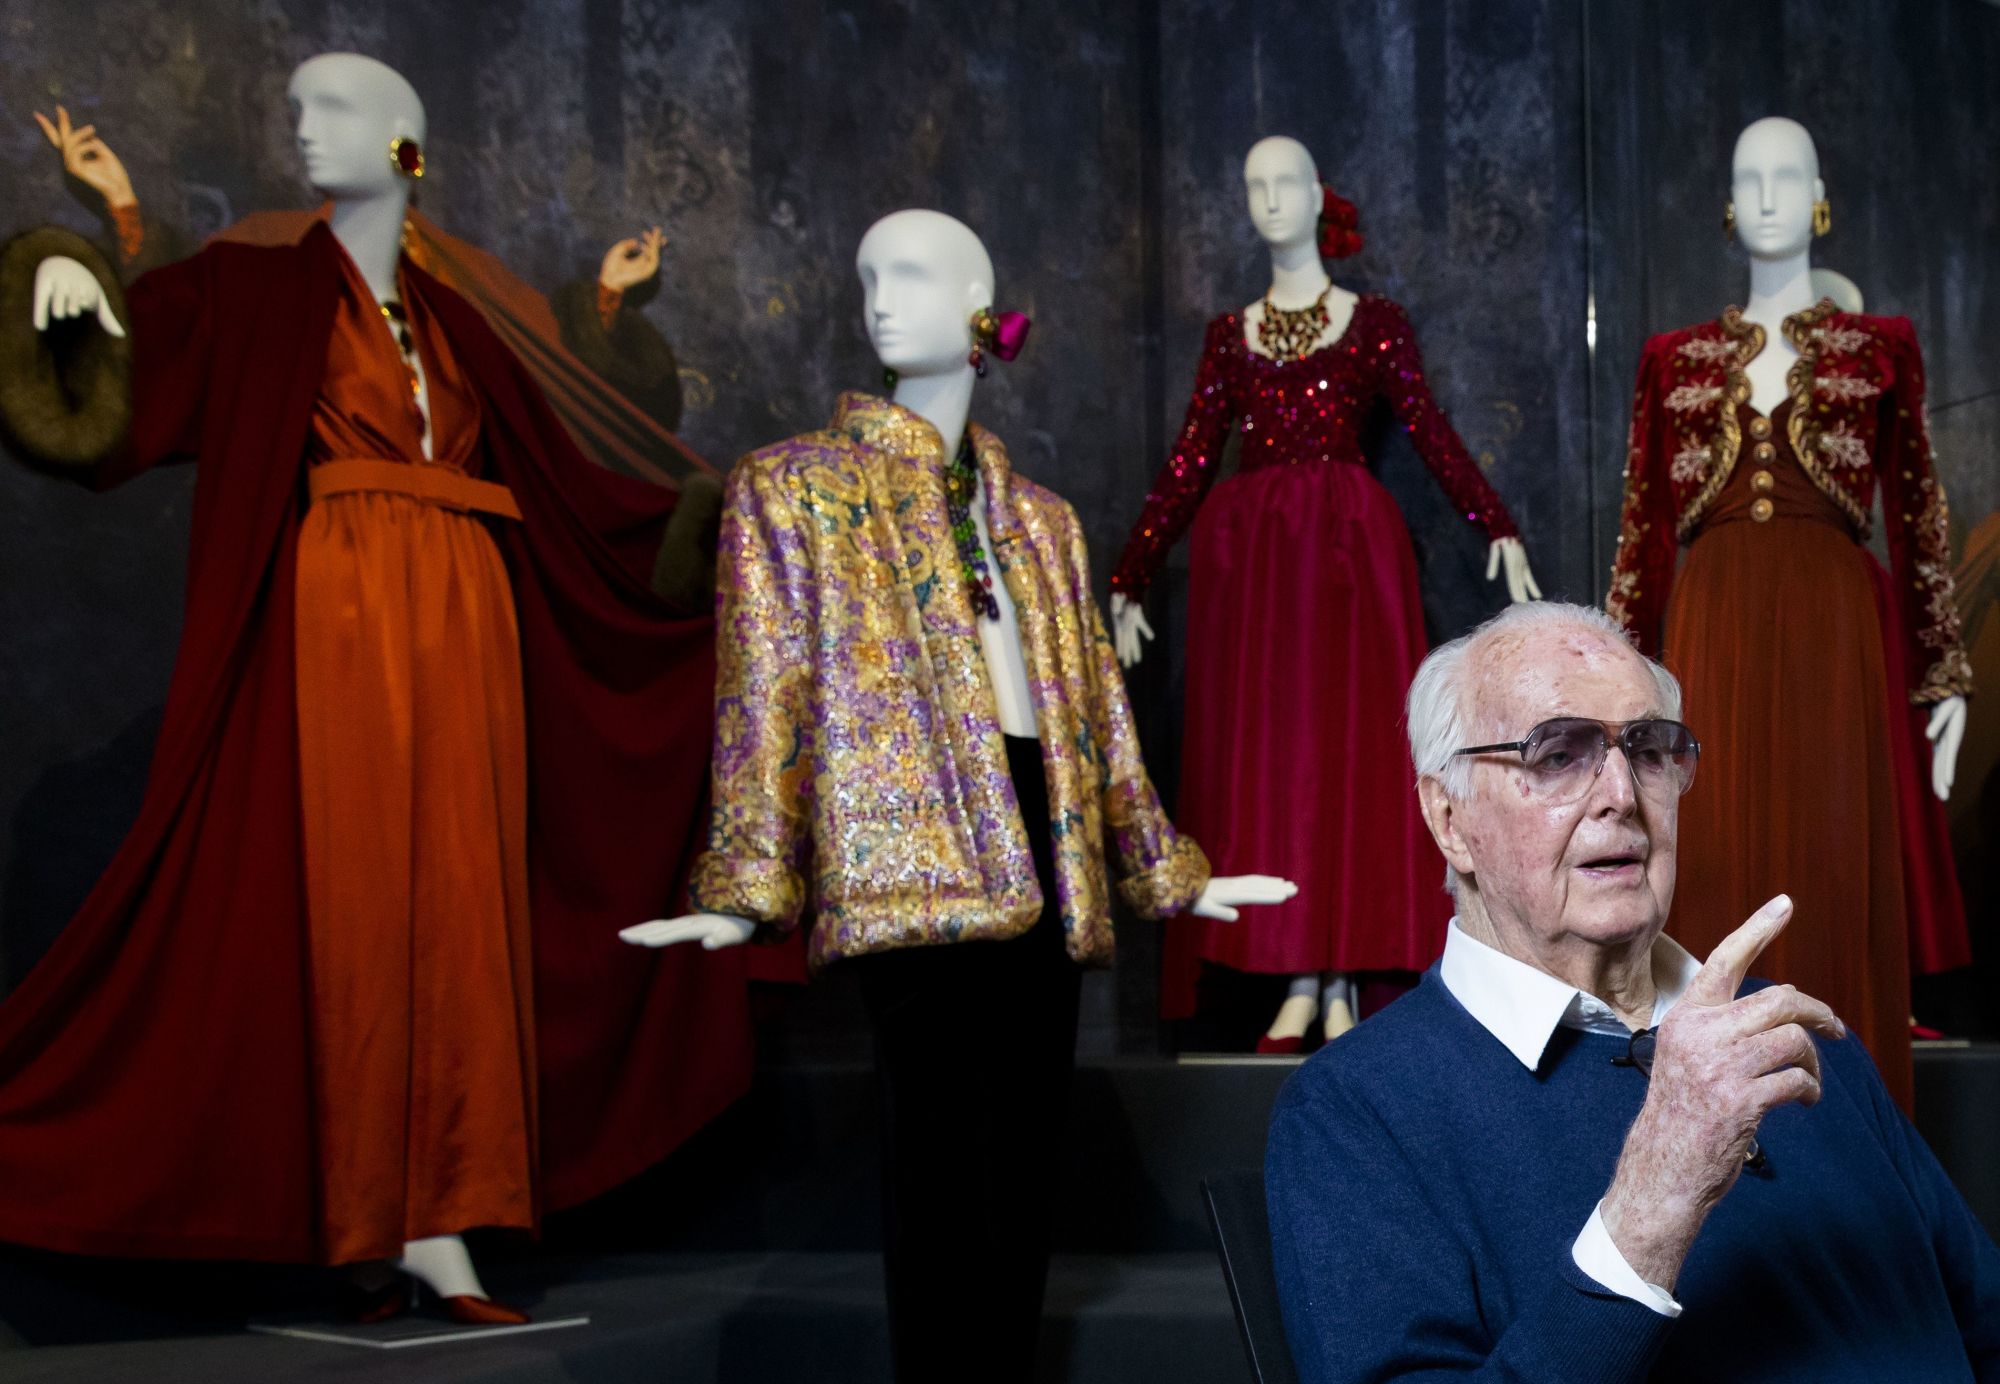 Givenchy passes away: A look at the designer's most iconic looks